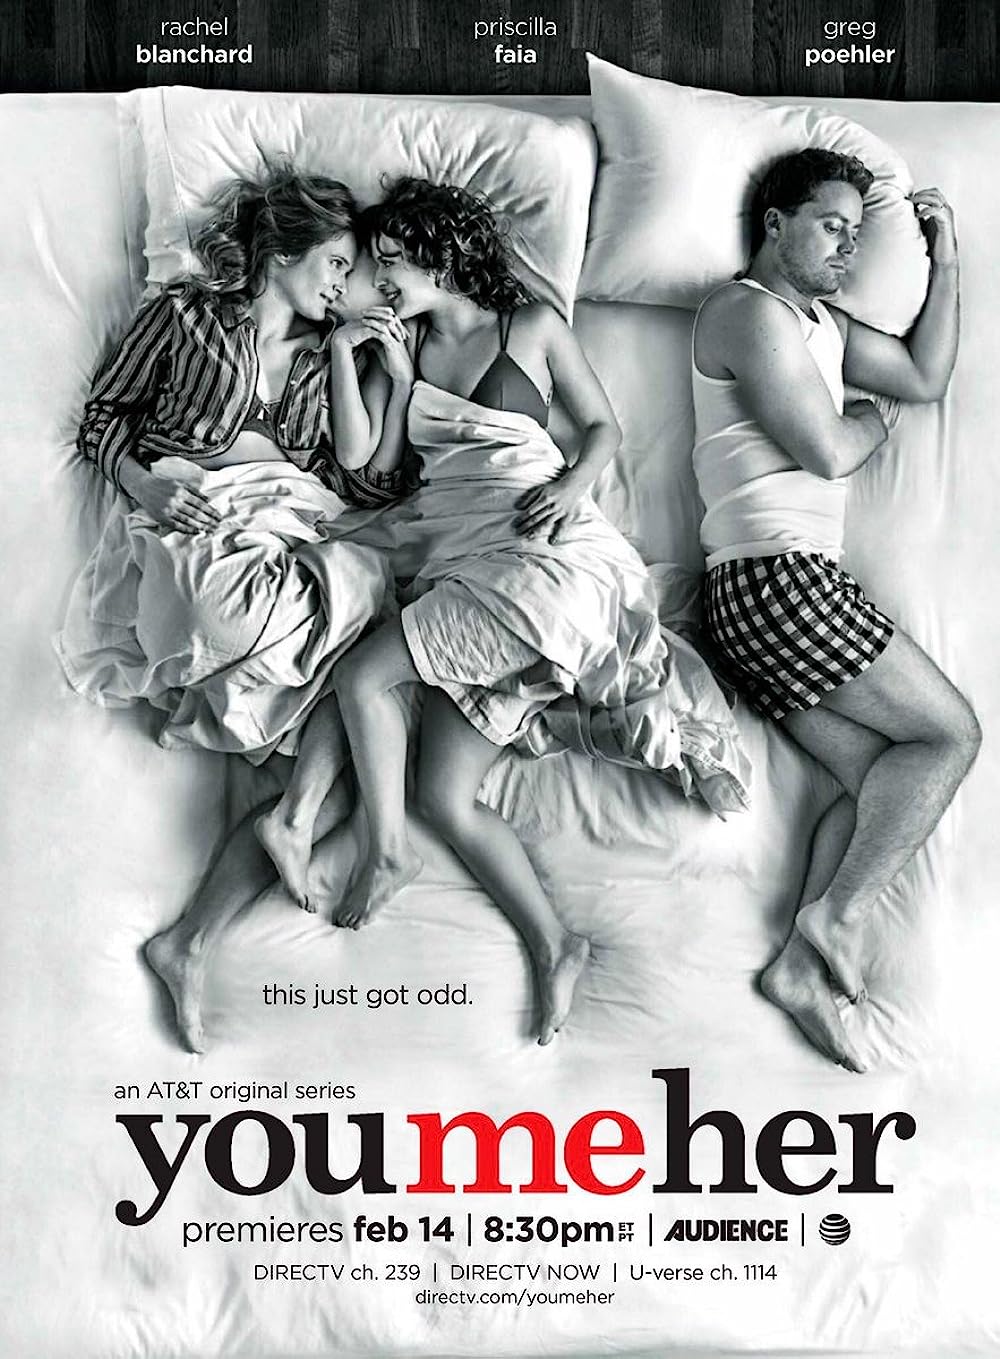 You Me Her poster